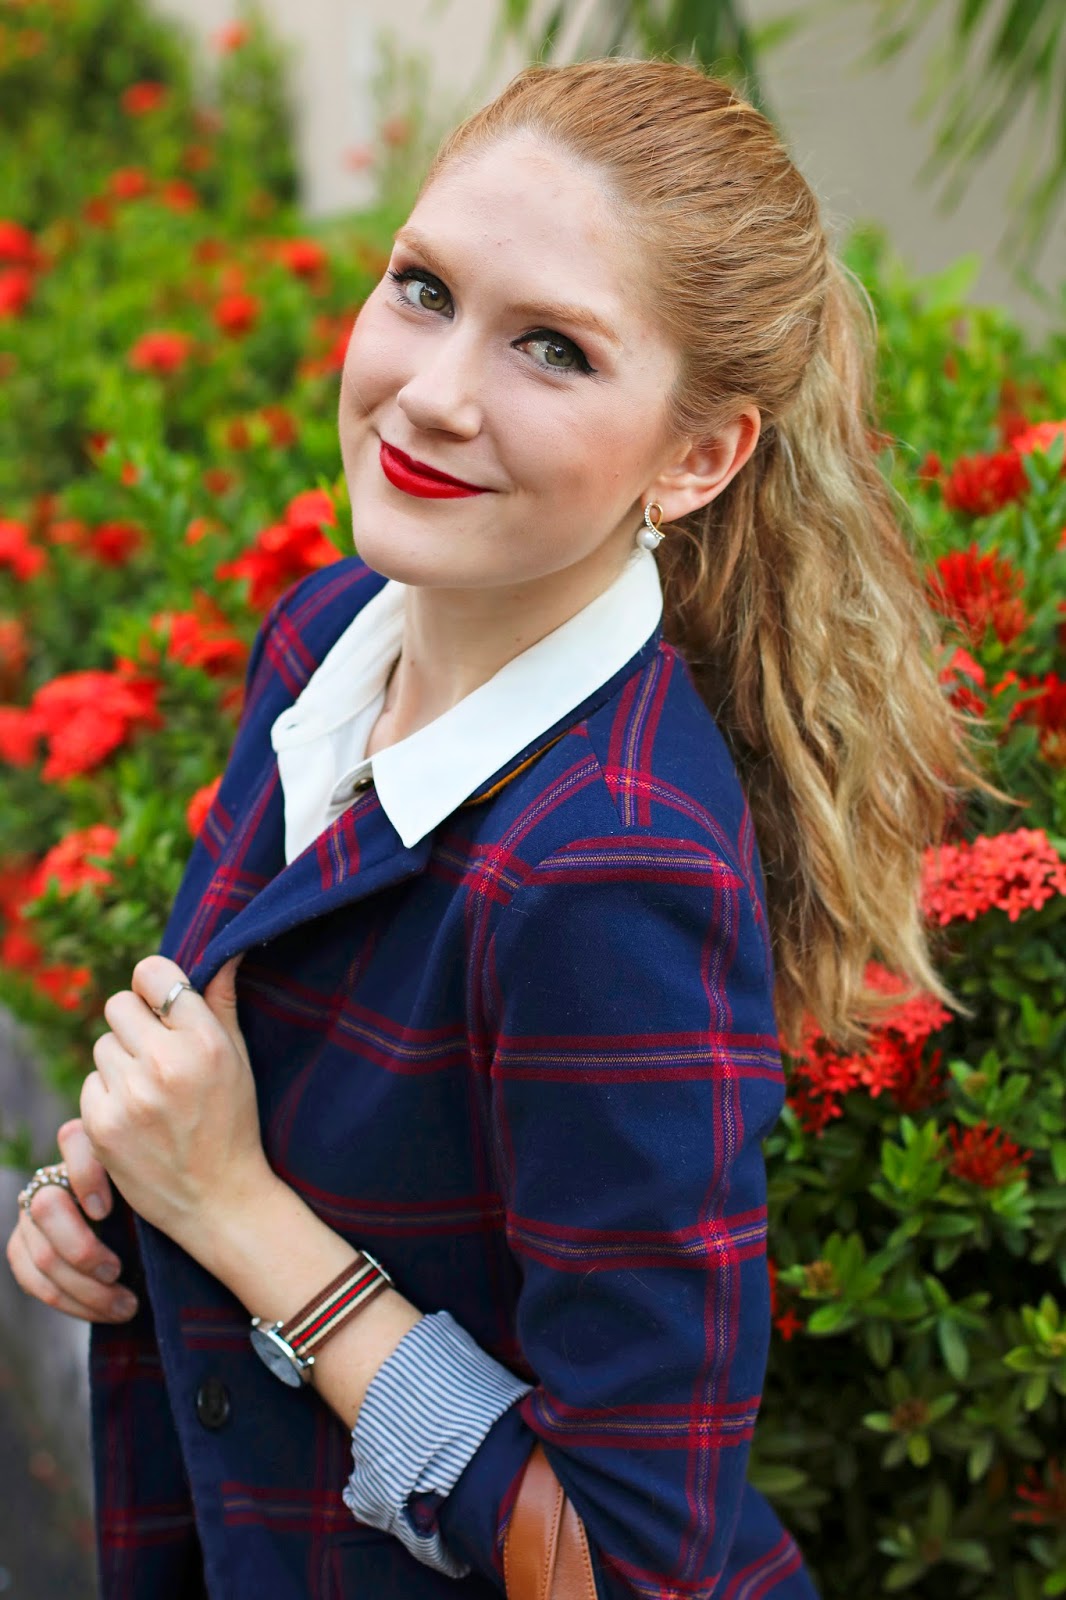 A plaid blazer is a great way to add some holiday flair to your work outfits!